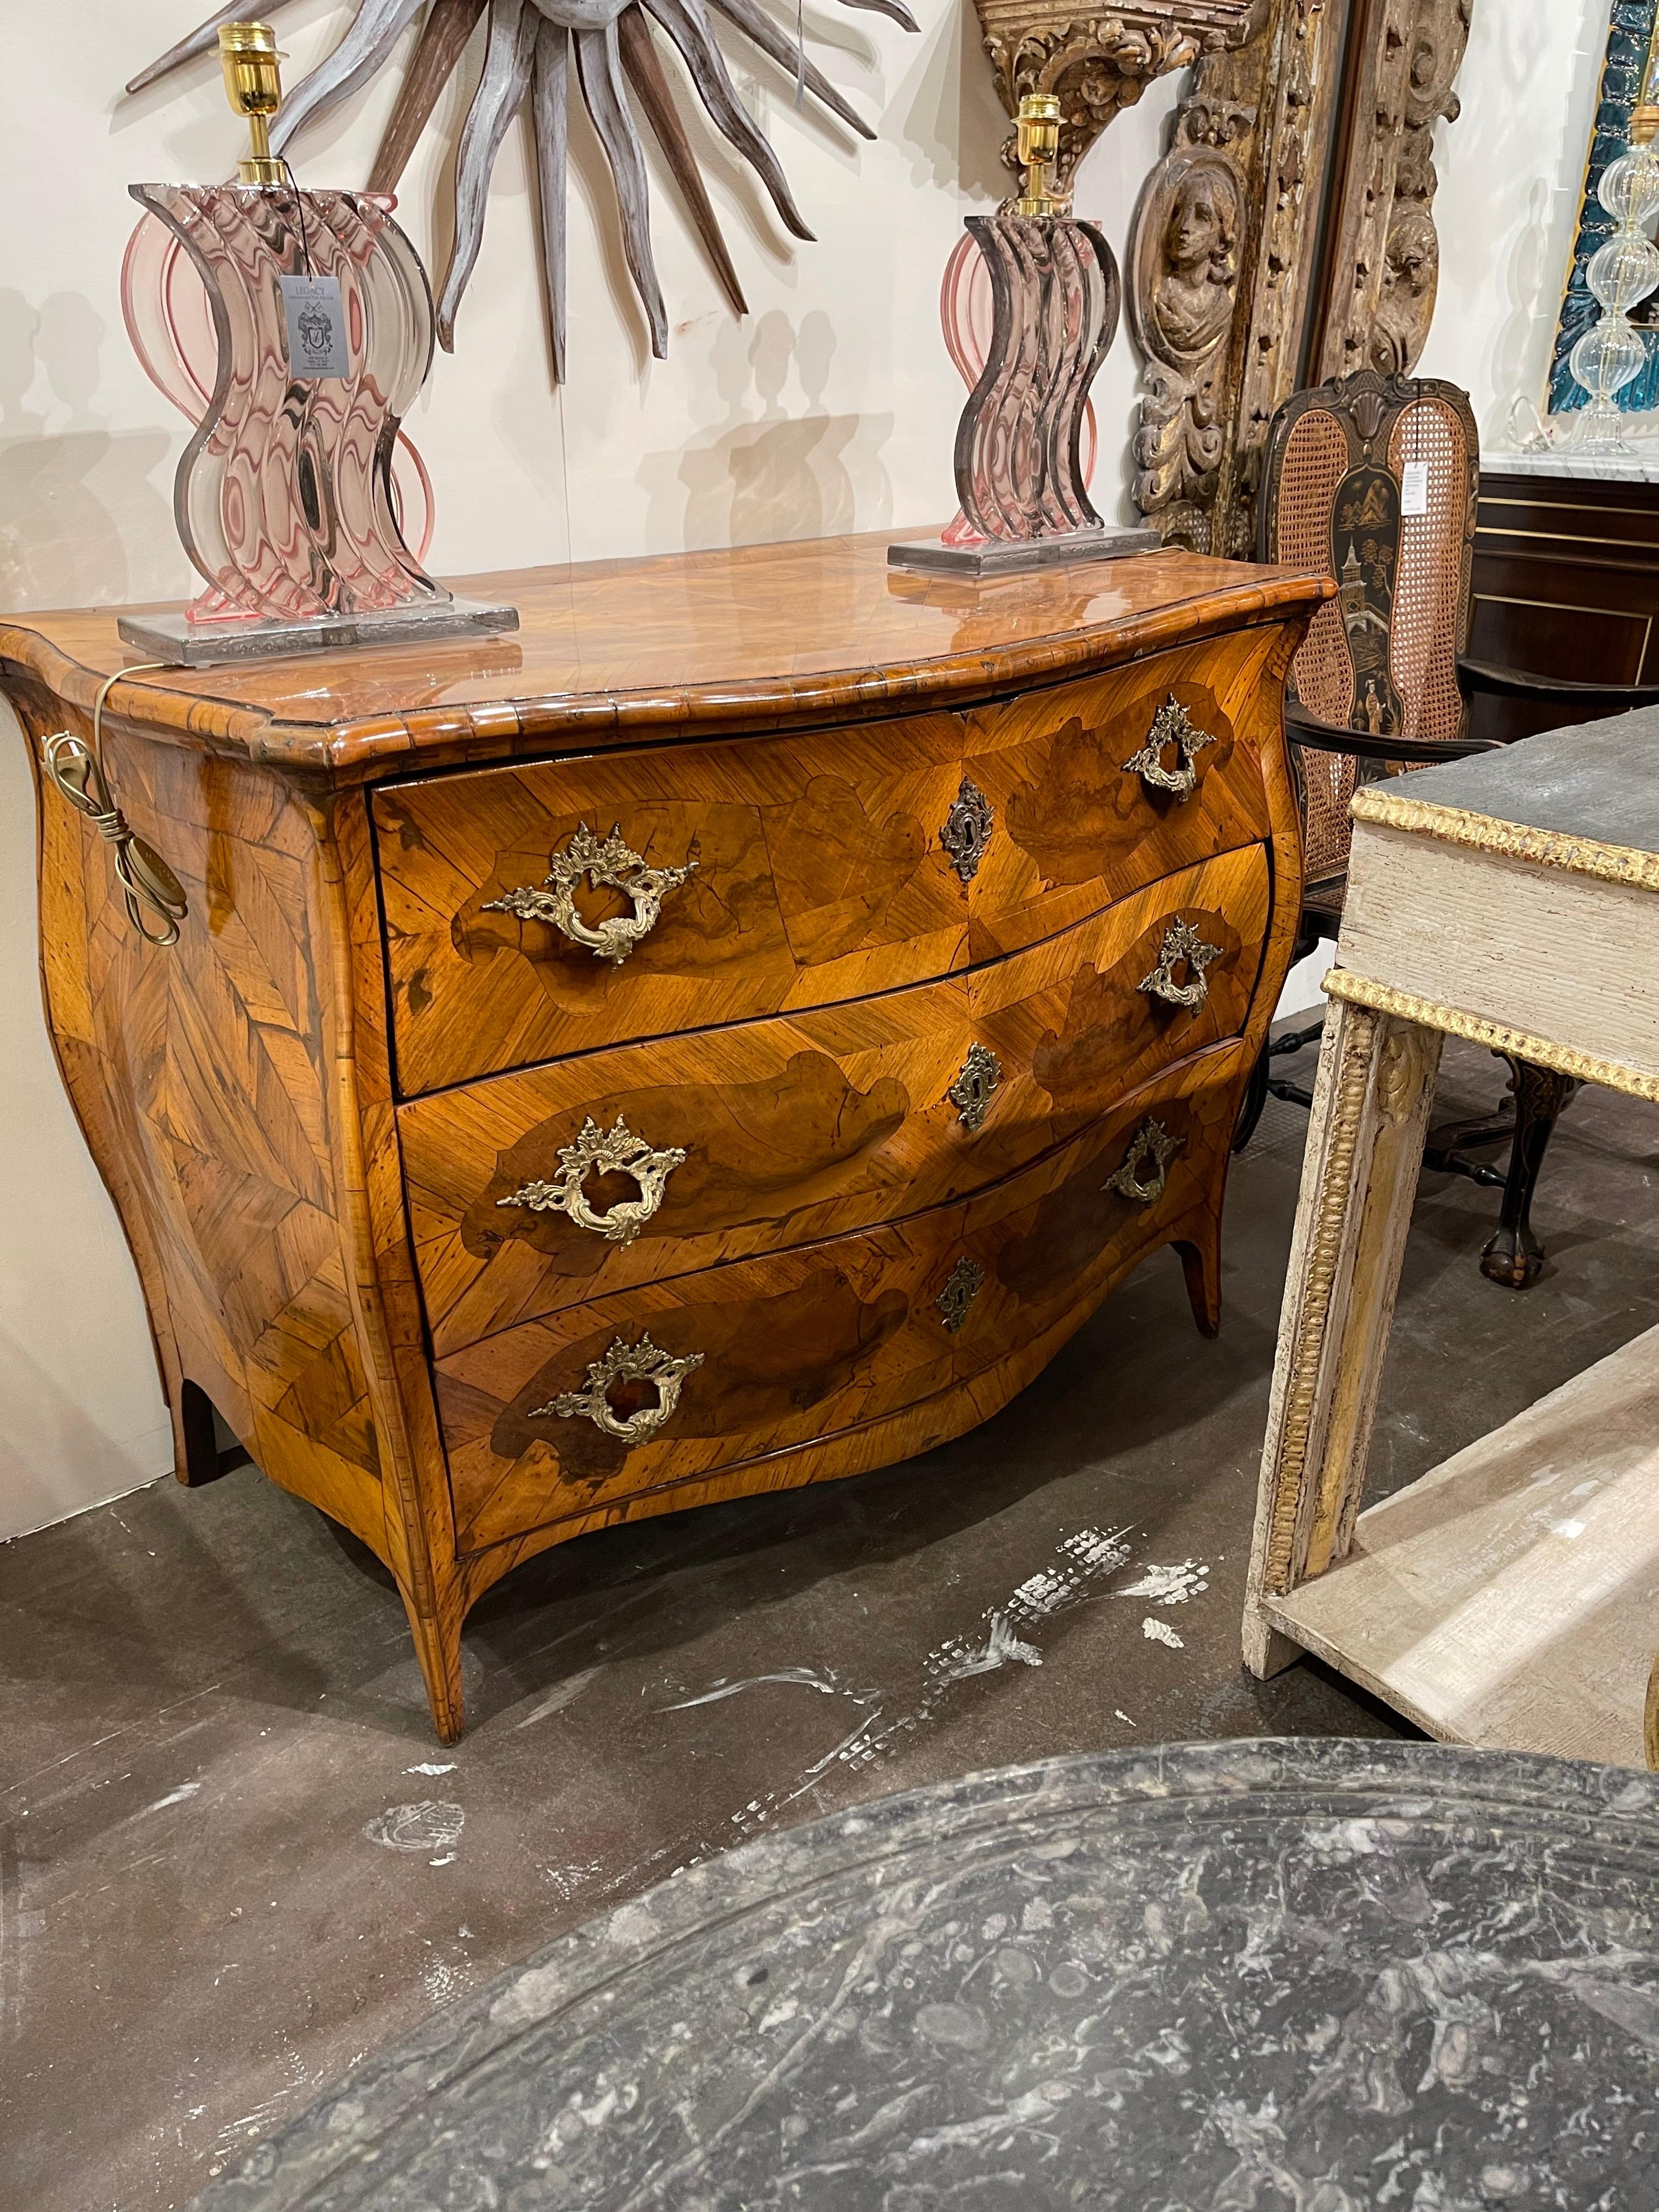 Outstanding circa 1780 Italian bombe and serpentine fronted commode with shaped burl walnut inlays on three drawers with fancy bronze pulls and escutcheons. Wonderful sleek corners flow smoothly onto slightly tapering legs.

Mellow yet rich patina.